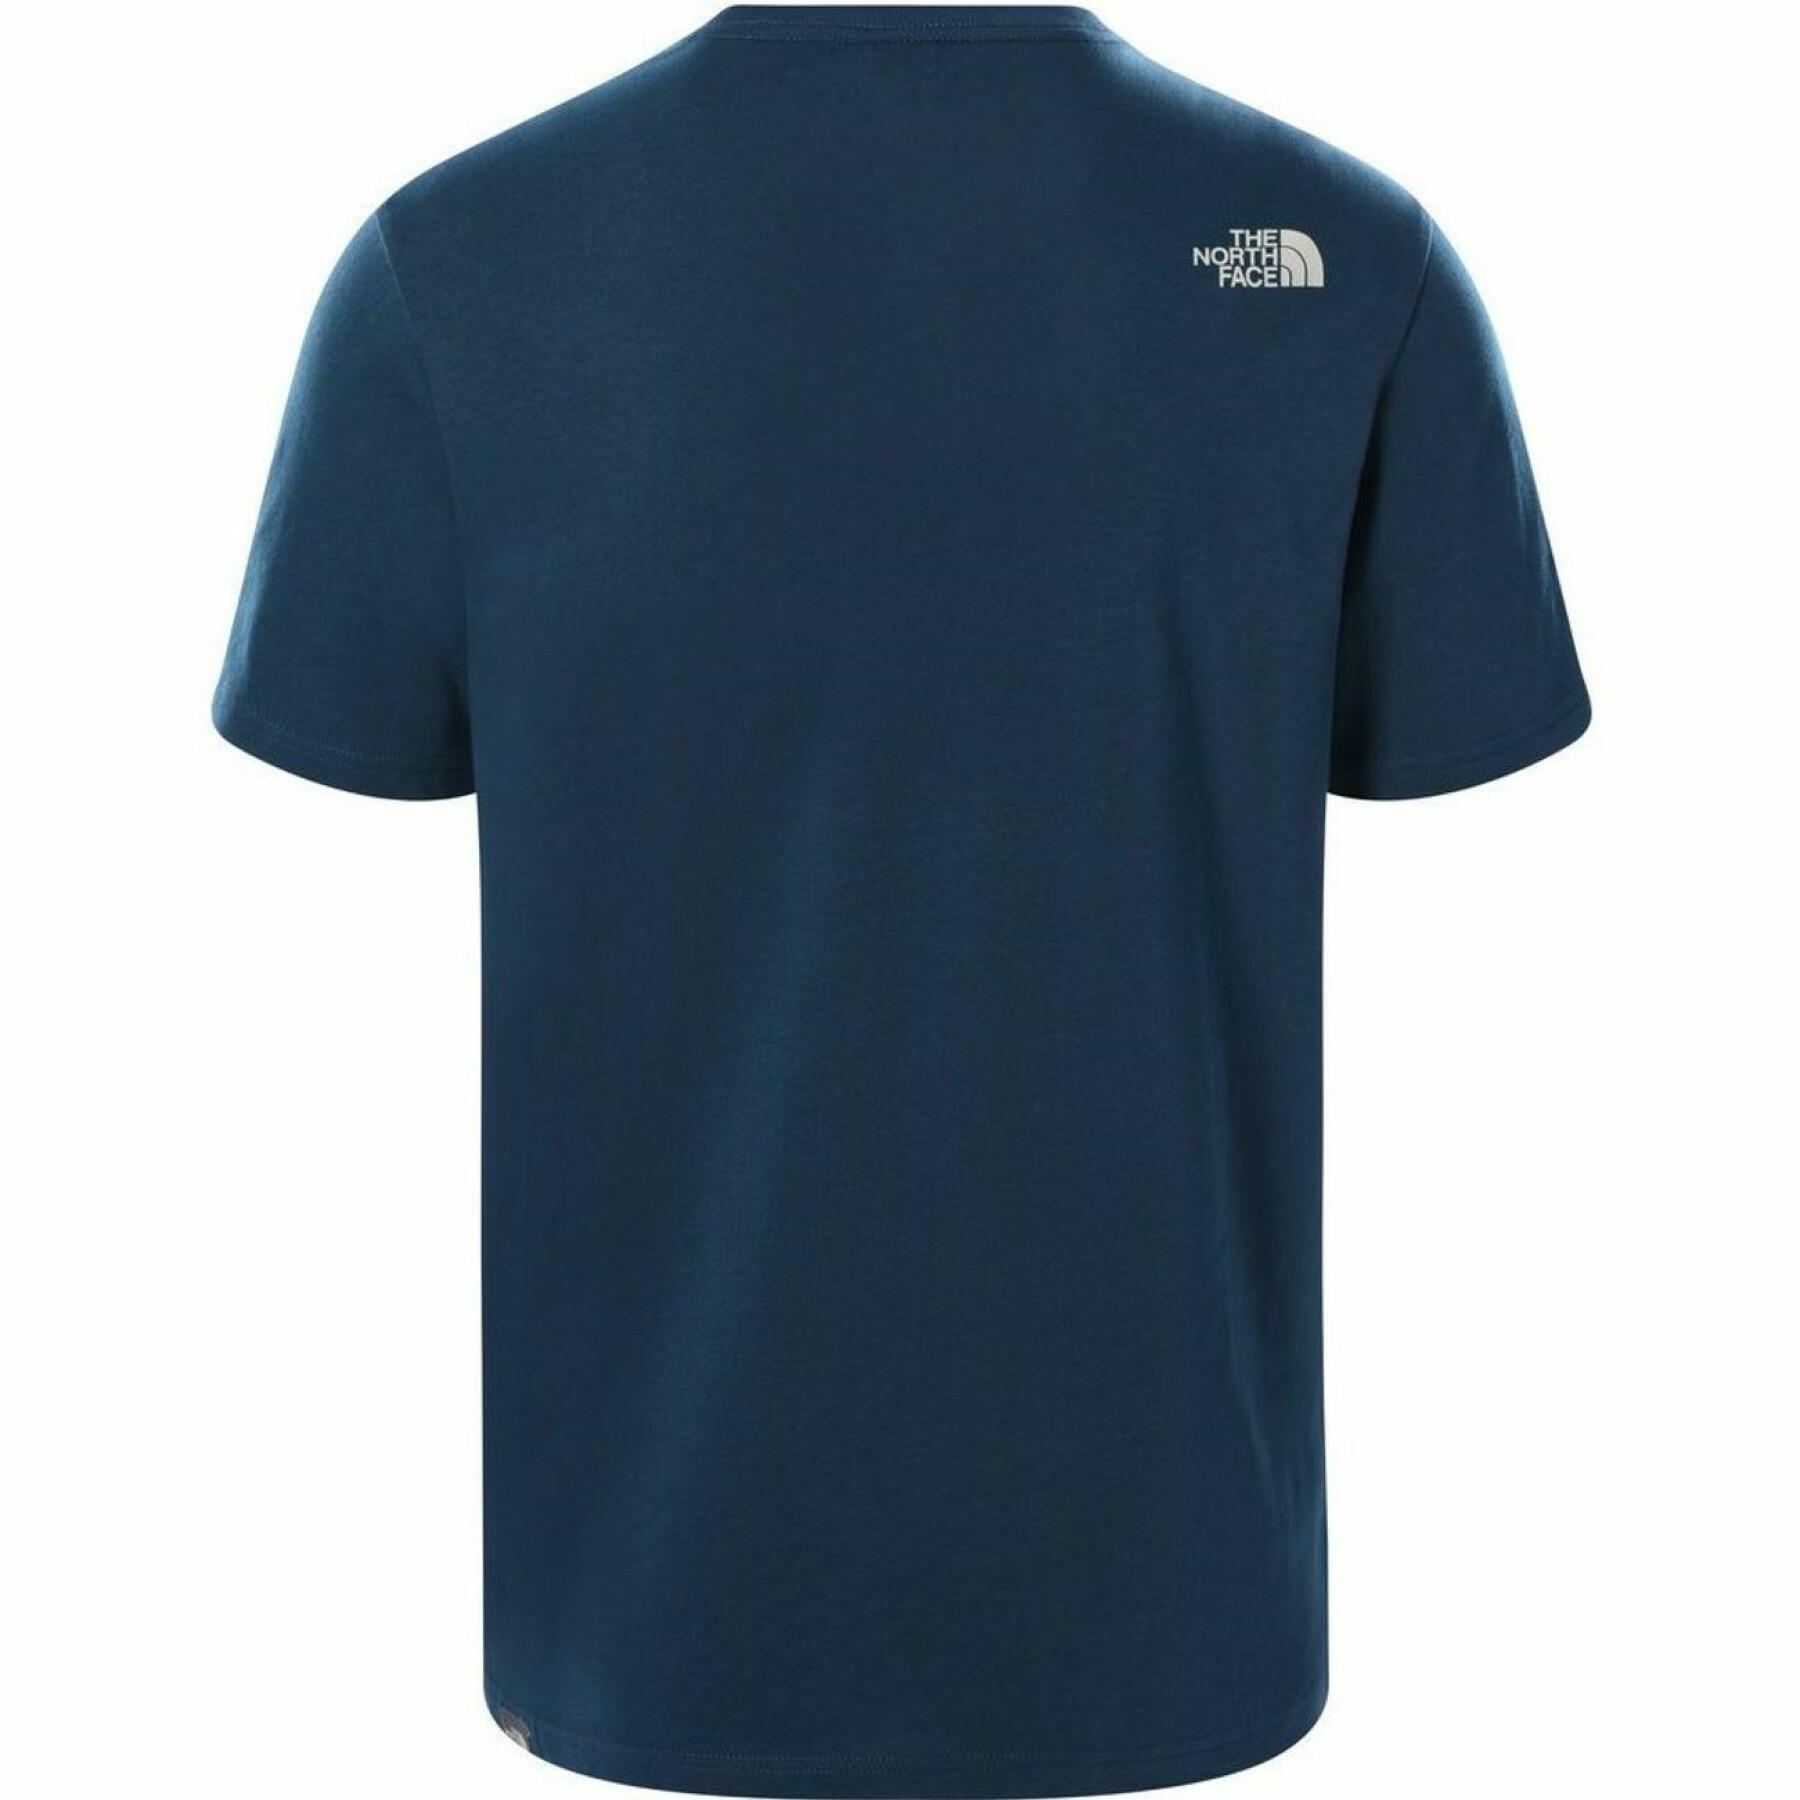 Klassisches T-Shirt The North Face Woodcut